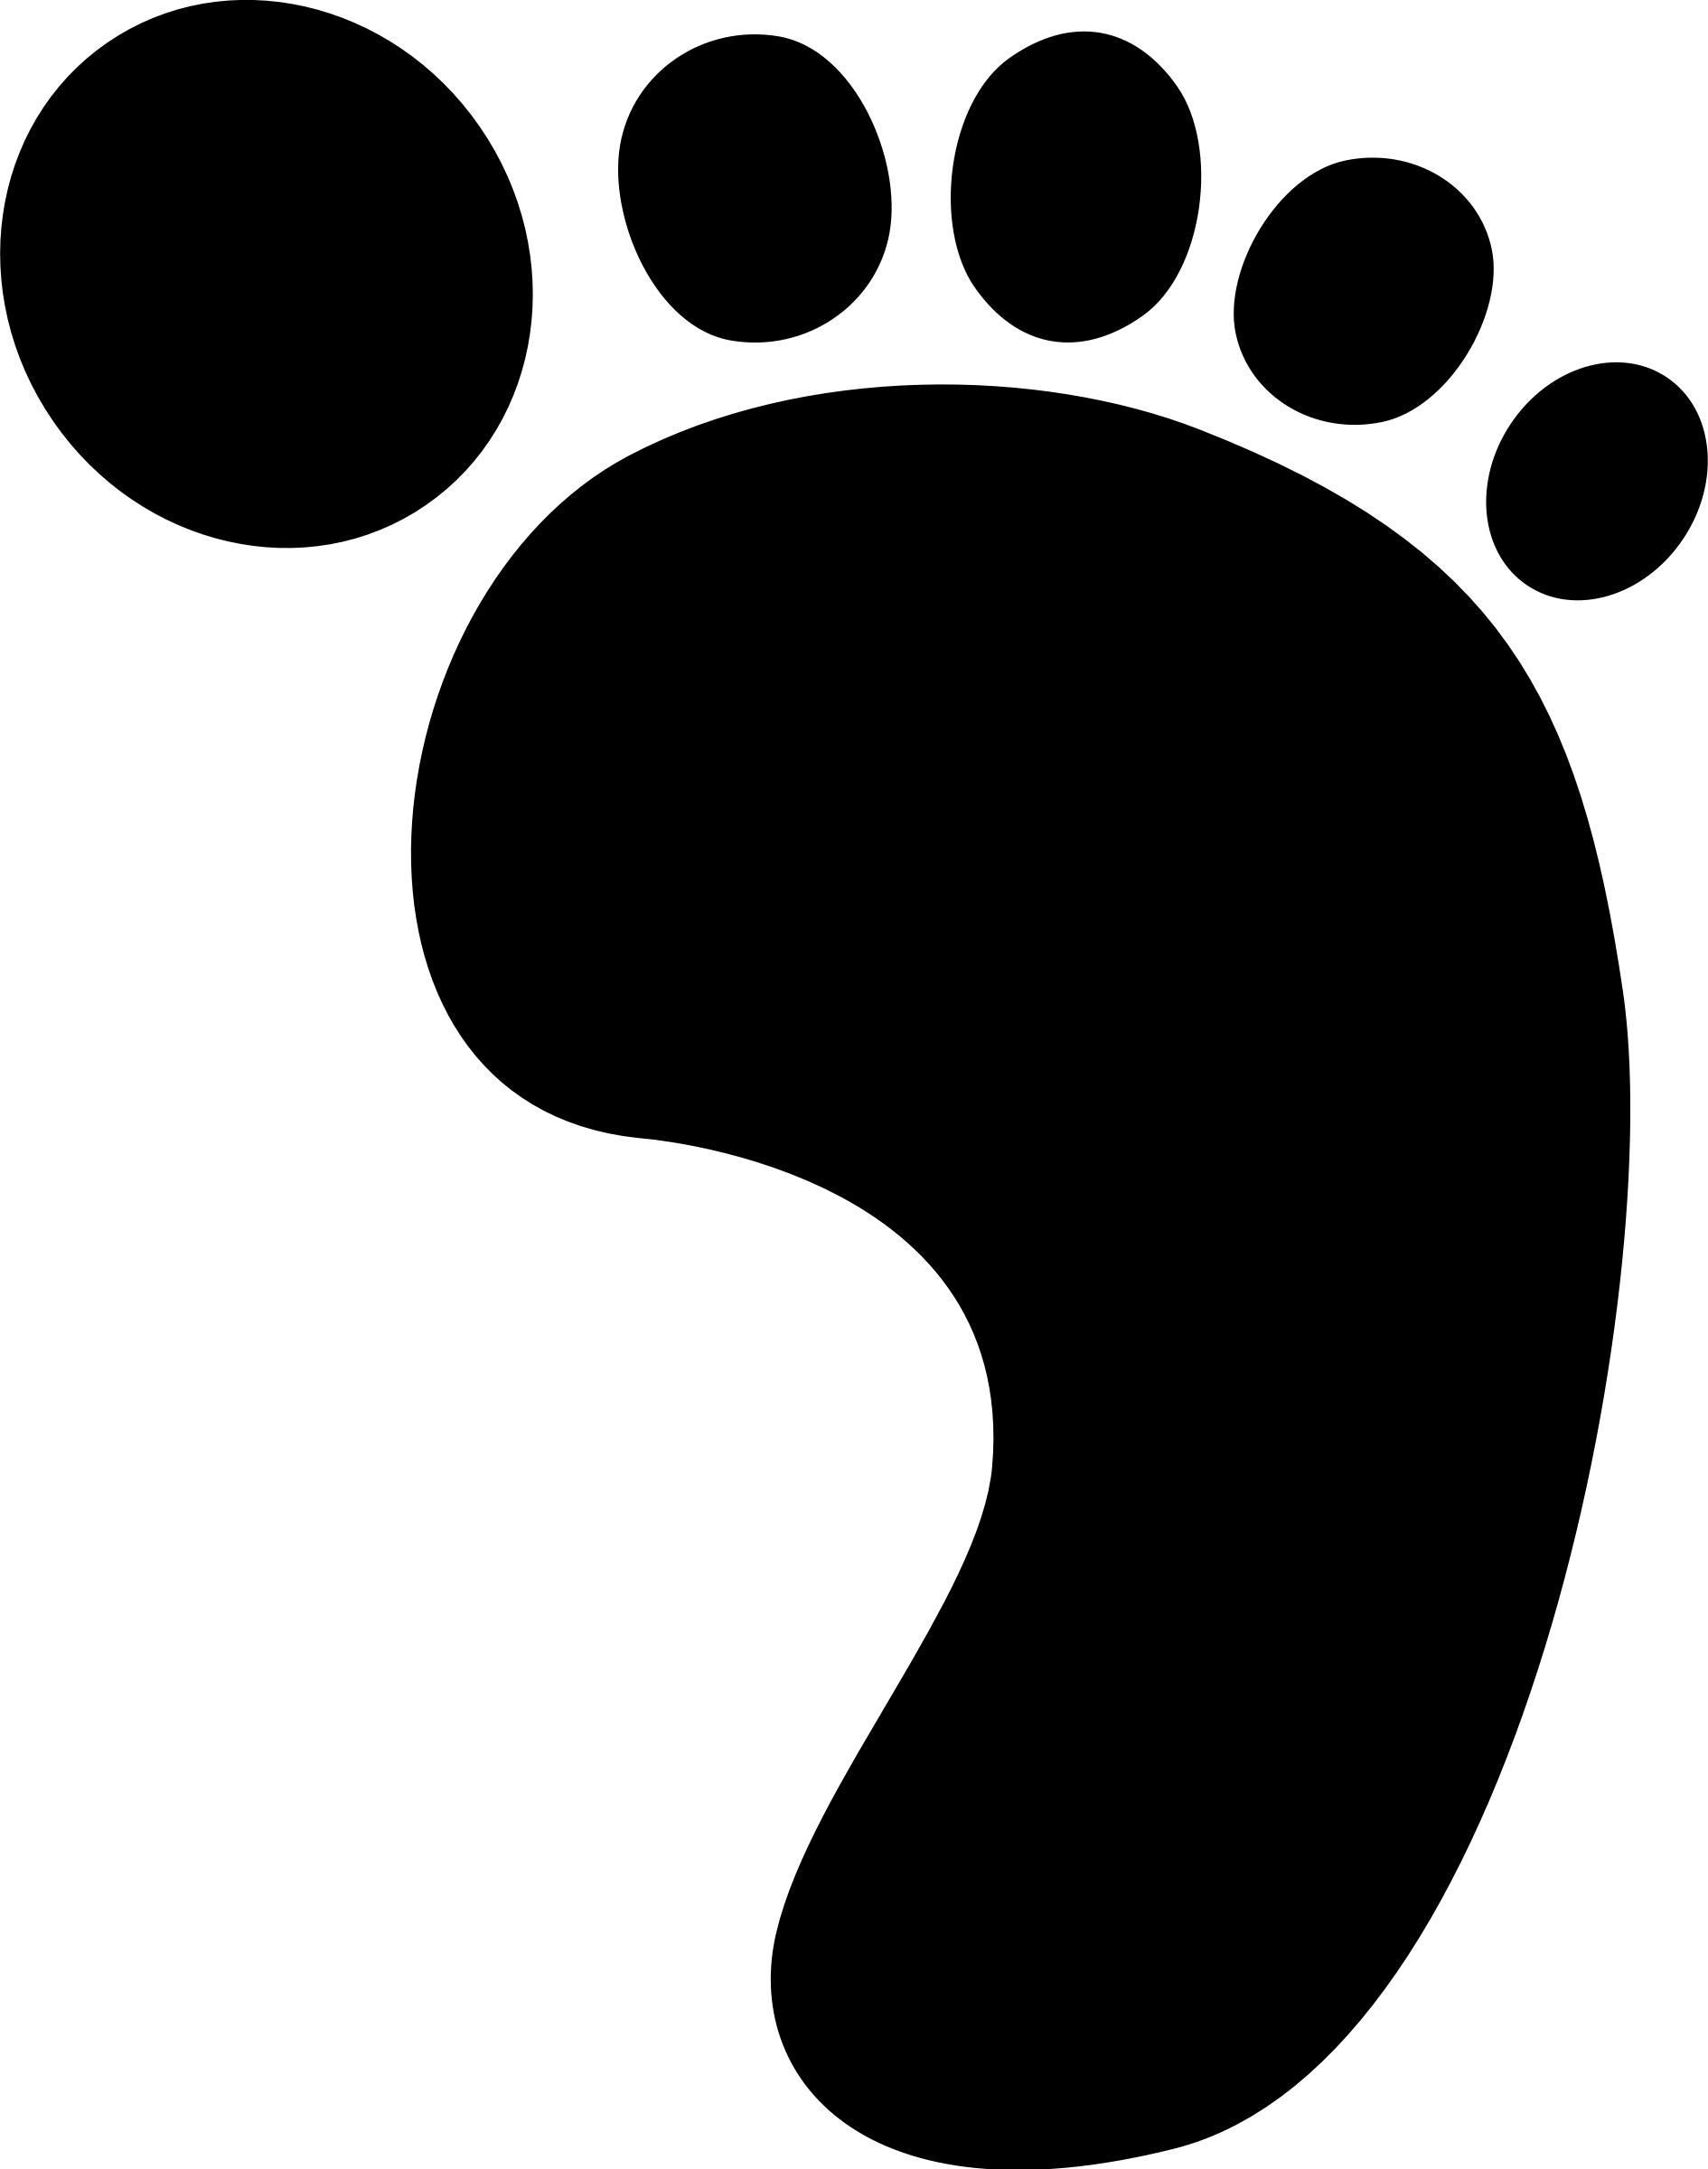 Right Footprint icons